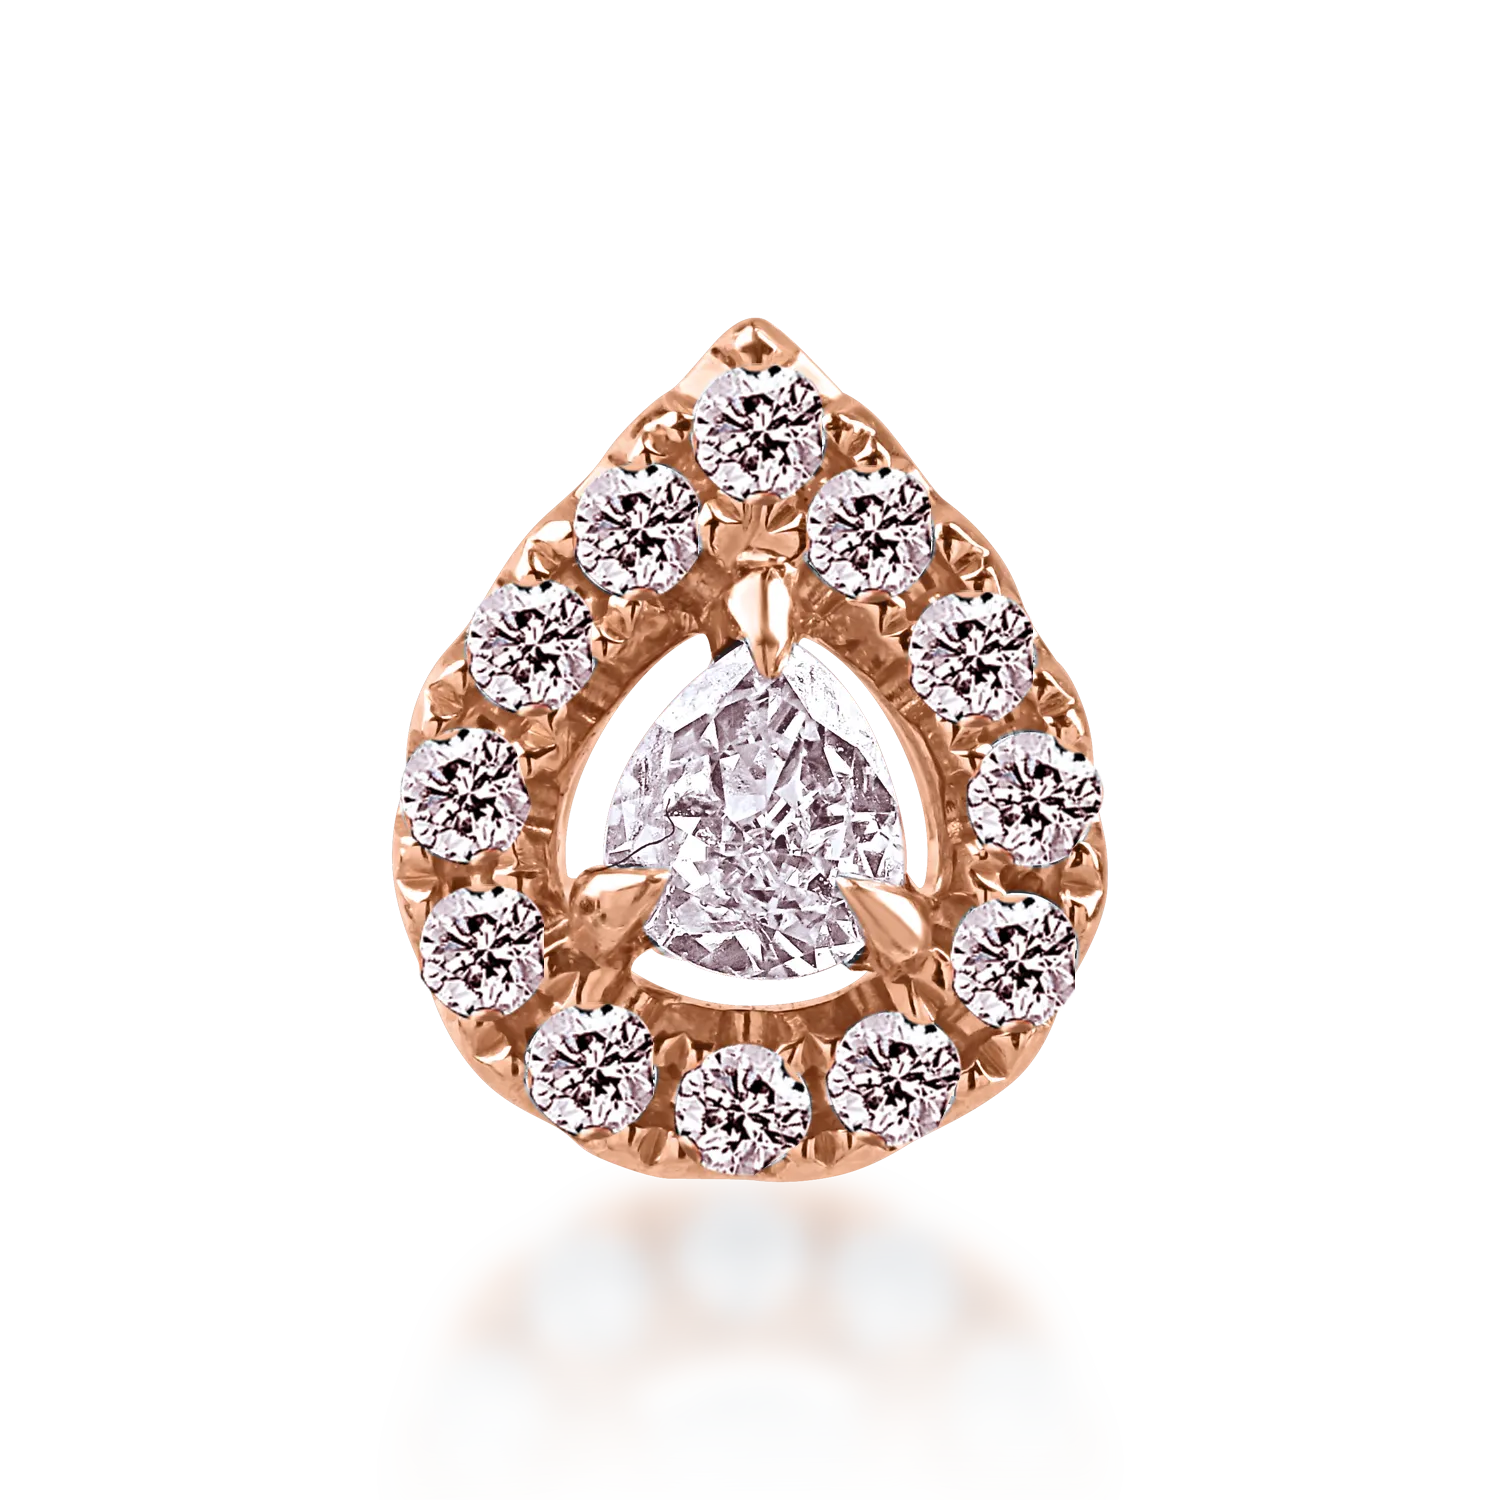 Rose gold pendant with 0.076ct pink diamond and 0.064ct pink diamonds